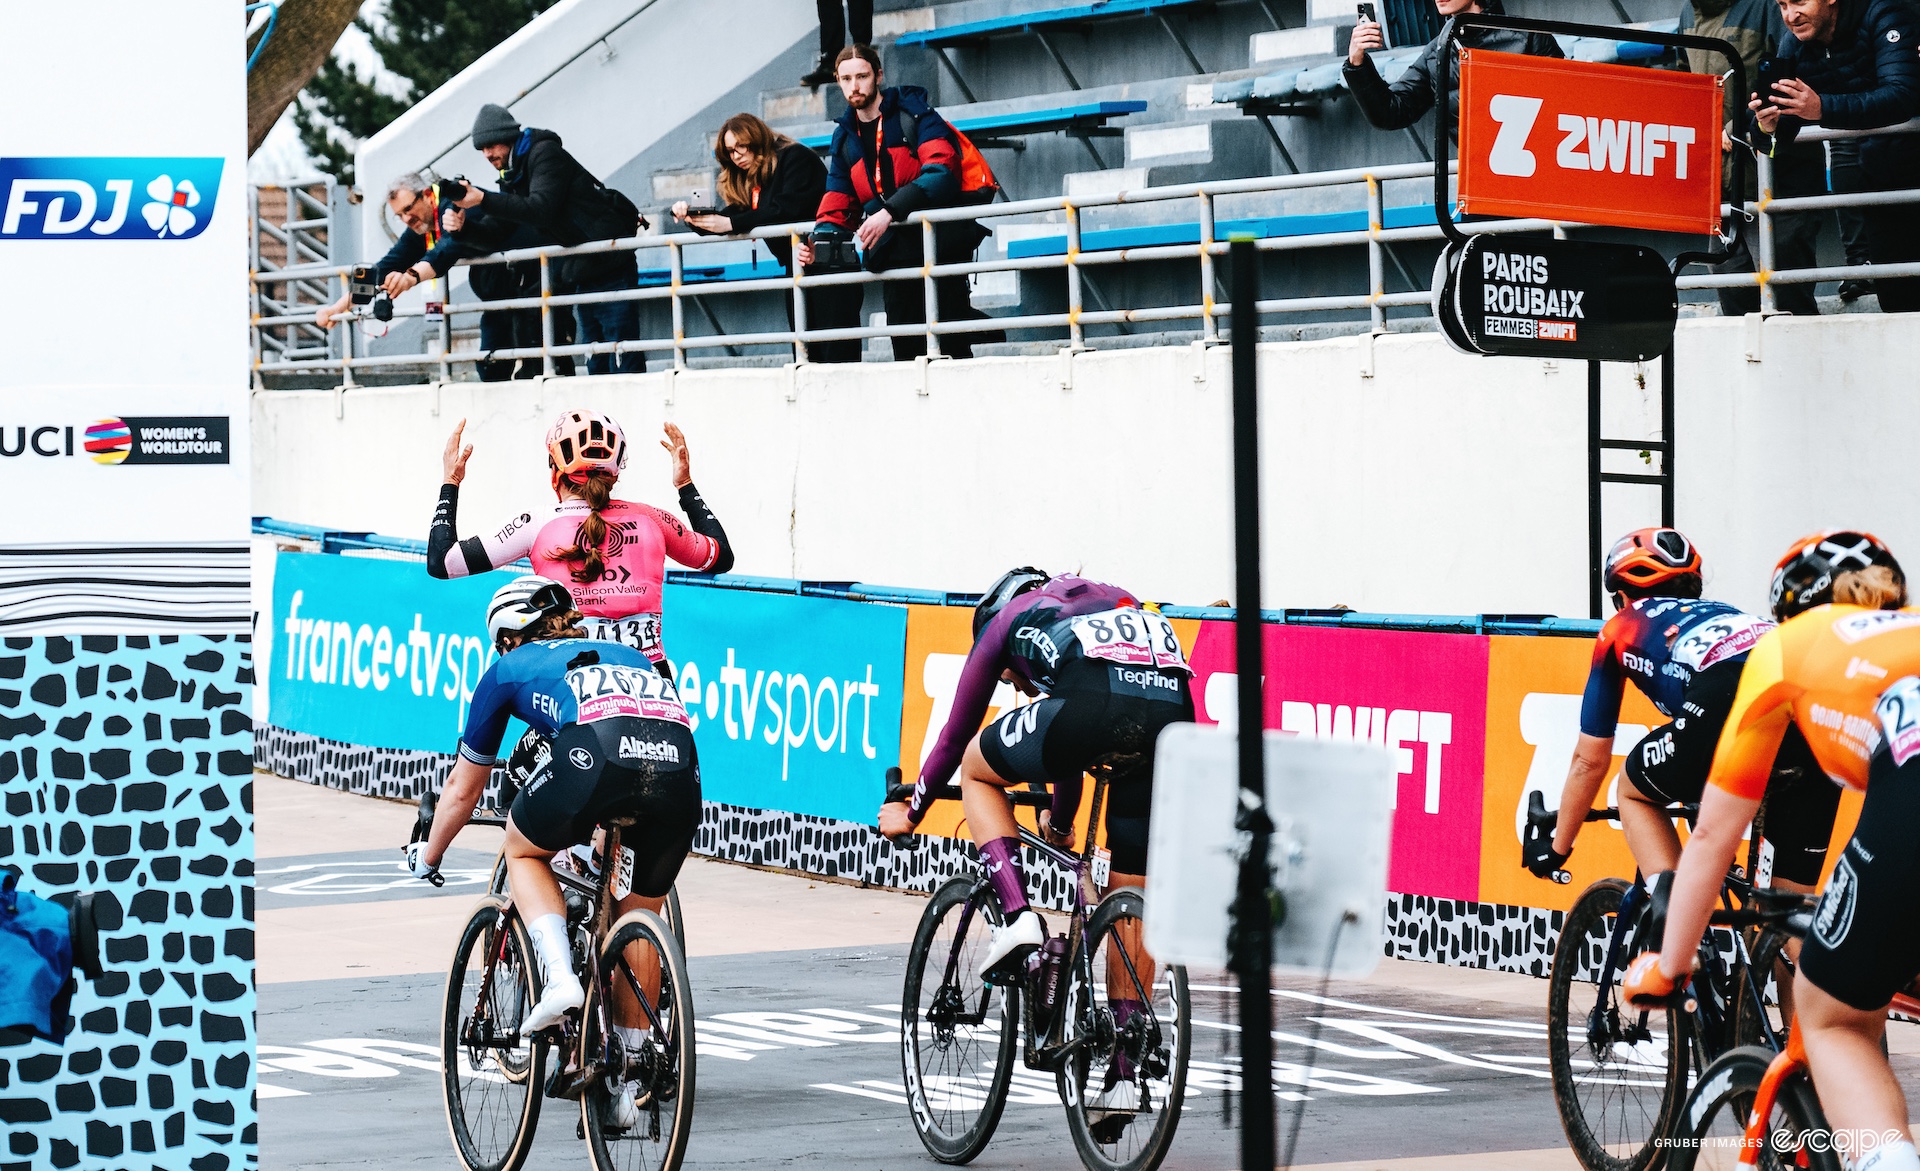 Alison Jackson sits up as she wins Paris-Roubaix Femmes. She shown from behind, at the front of a small group of riders, and has her hands in the air as she crosses under the finish gantry.